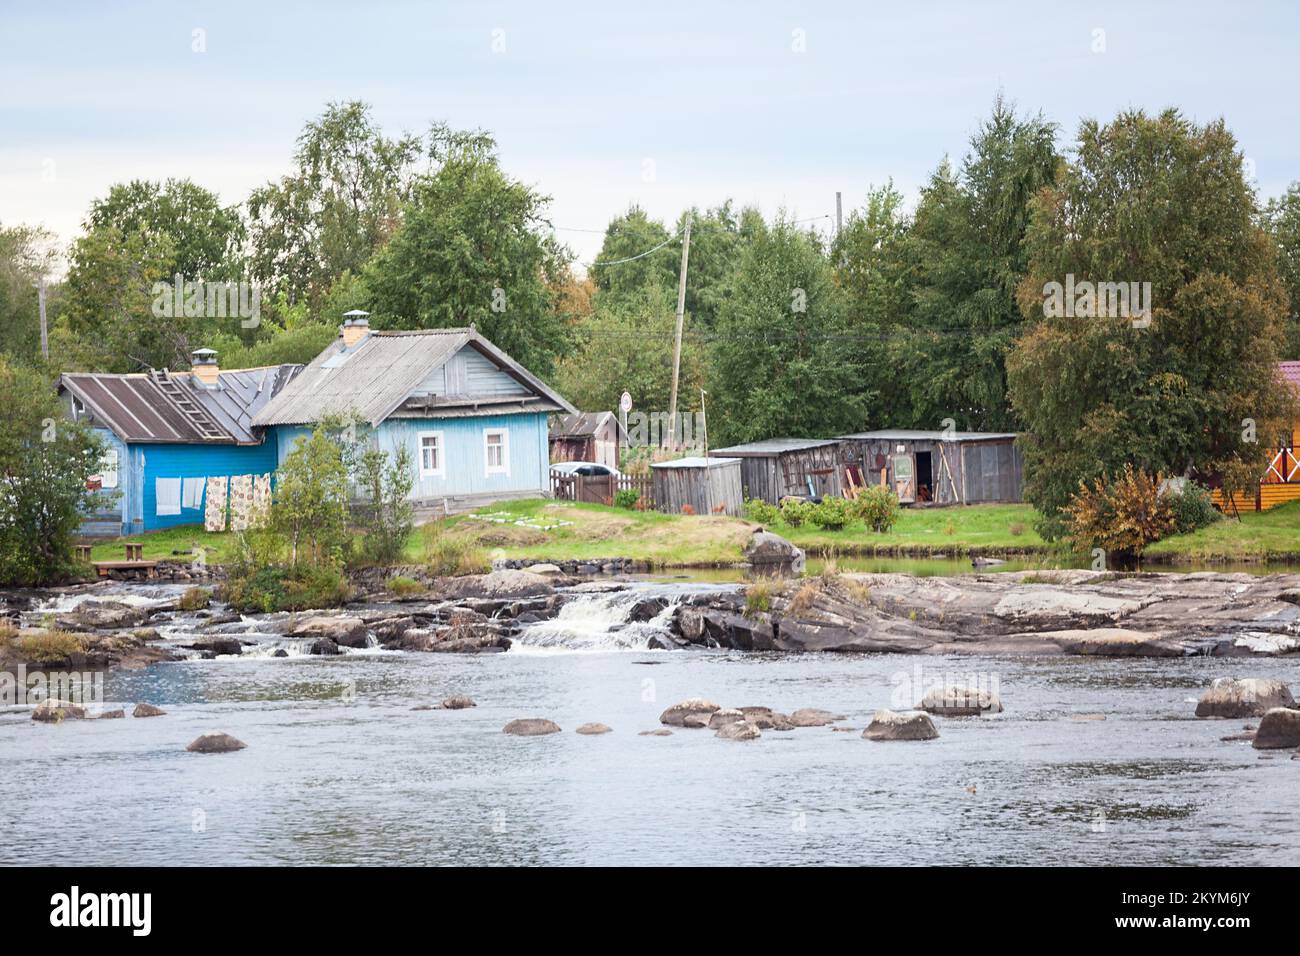 Old wooden house with sheds on the banks of the Nizhniy Vyg river, Belomorsk city, Karelia, northern Russia Stock Photo